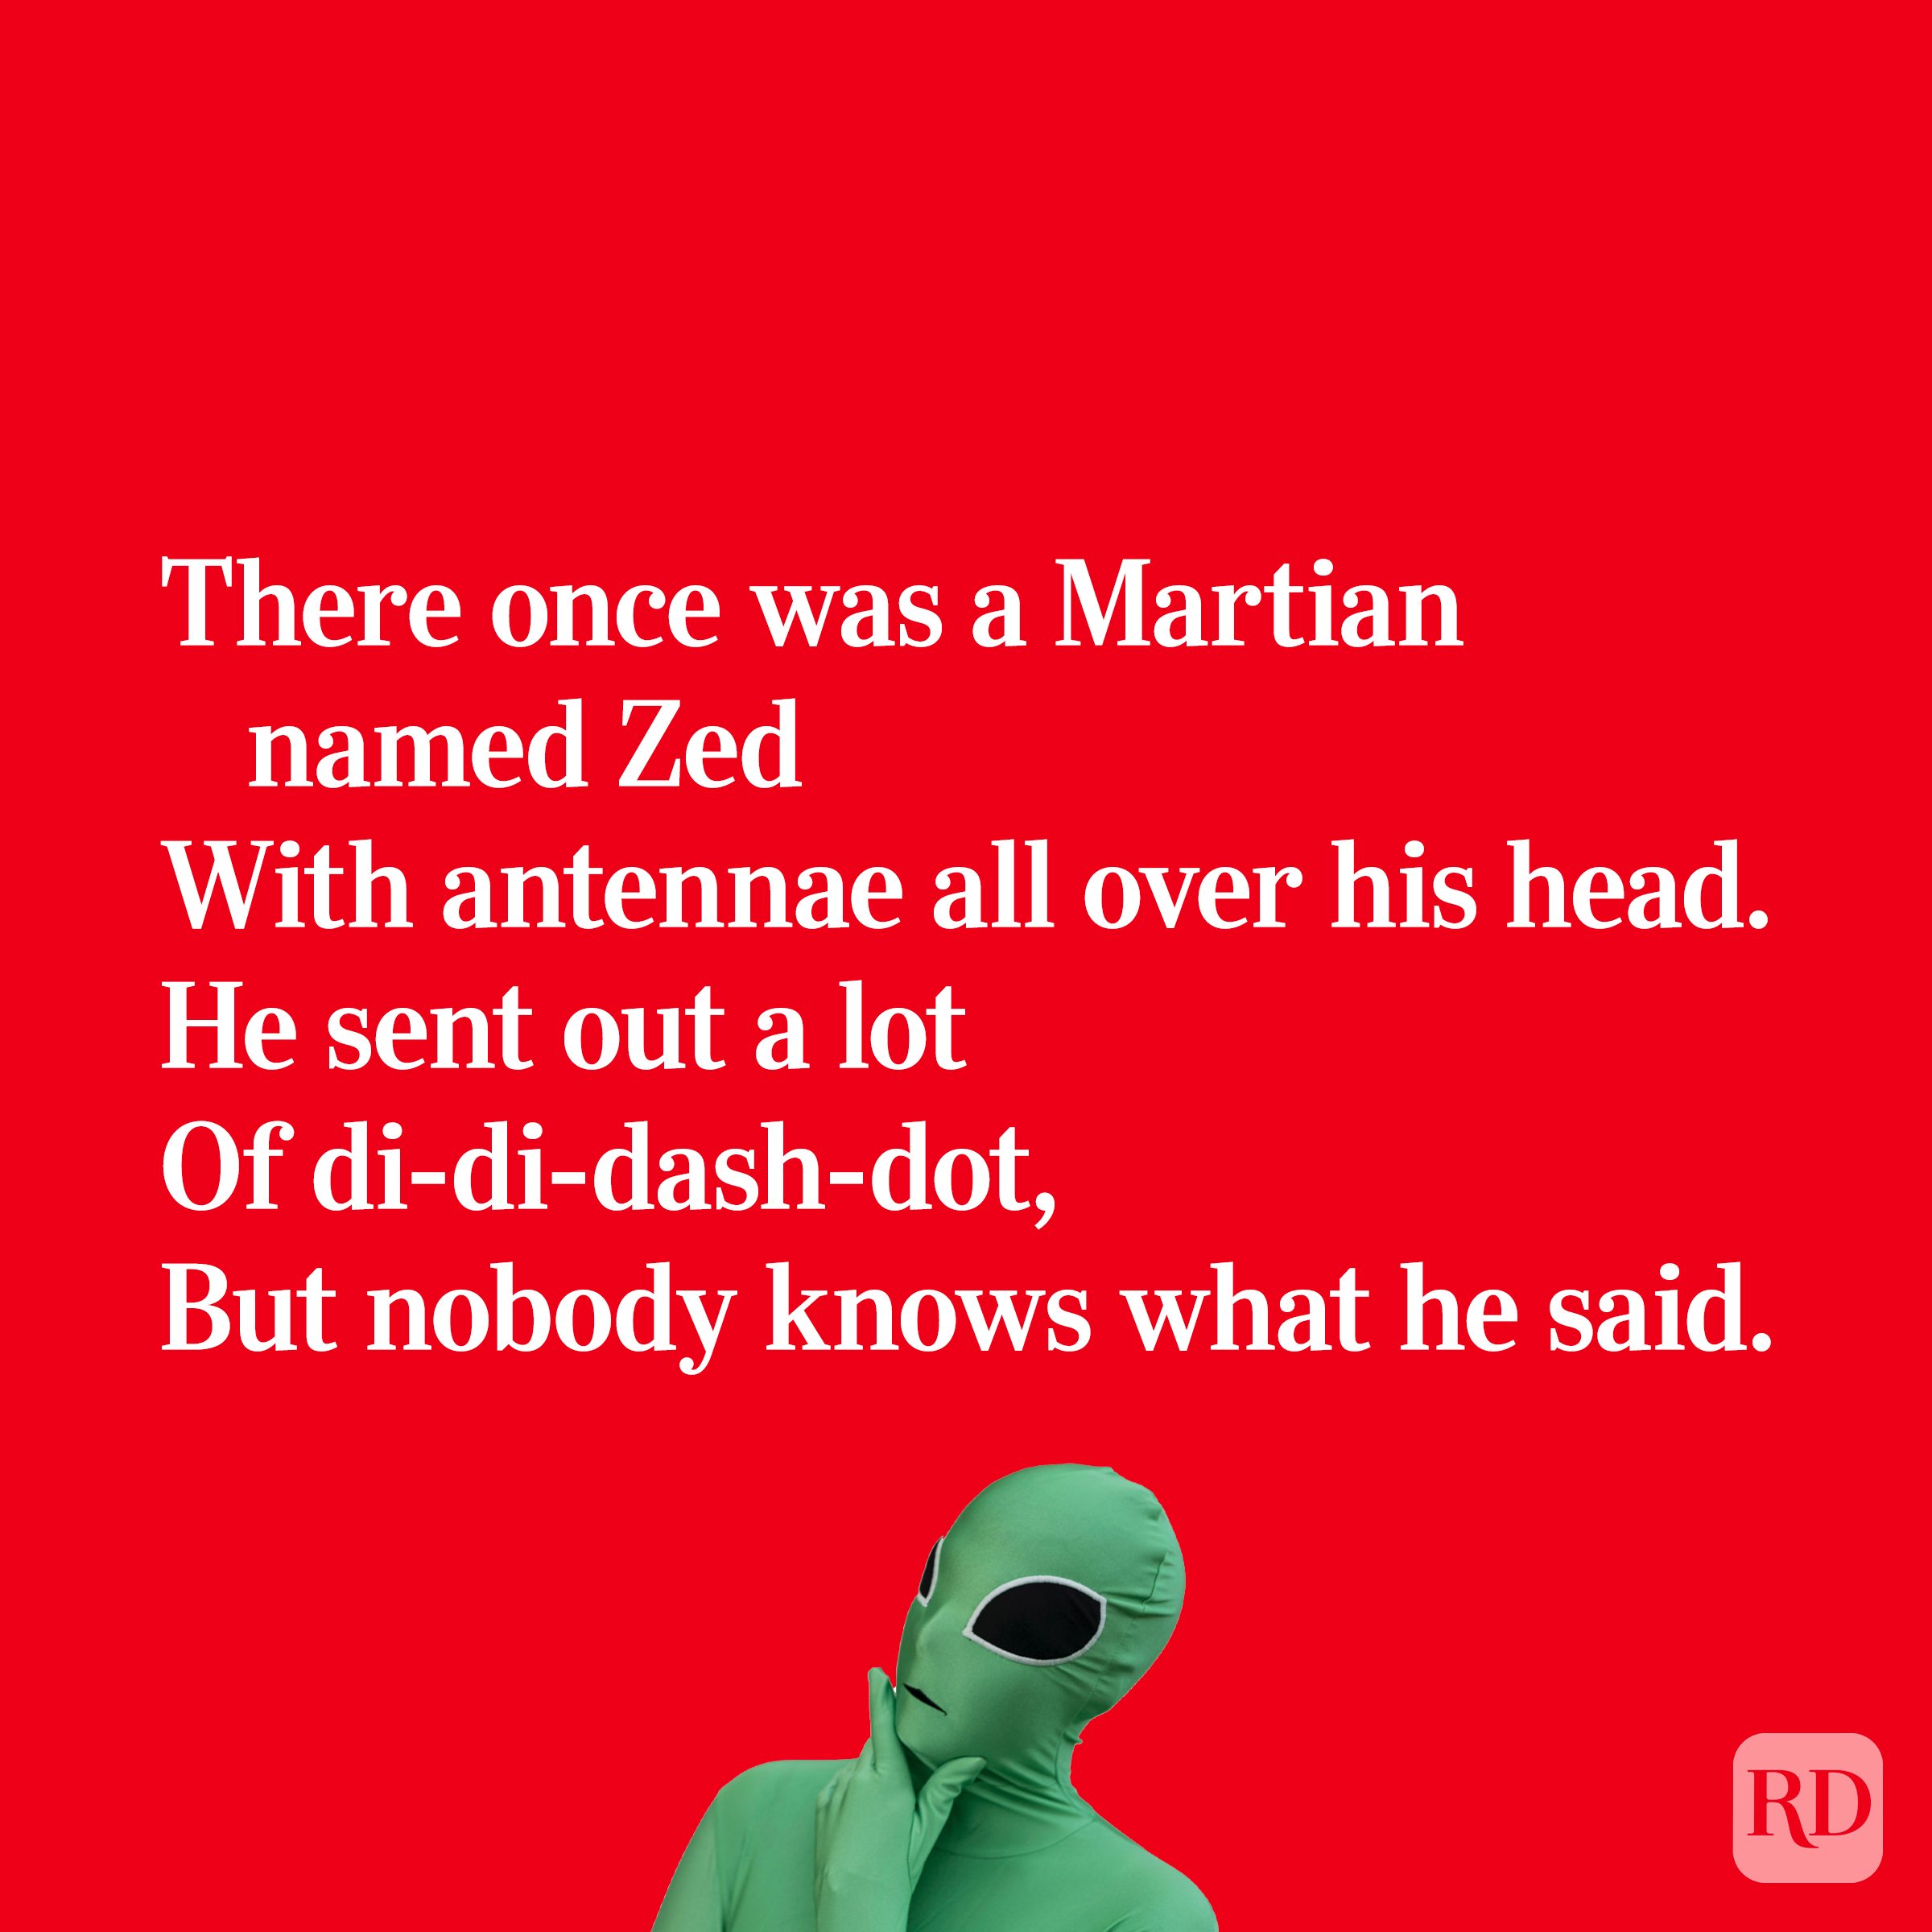 Quirky limerick about a Martian named Zed